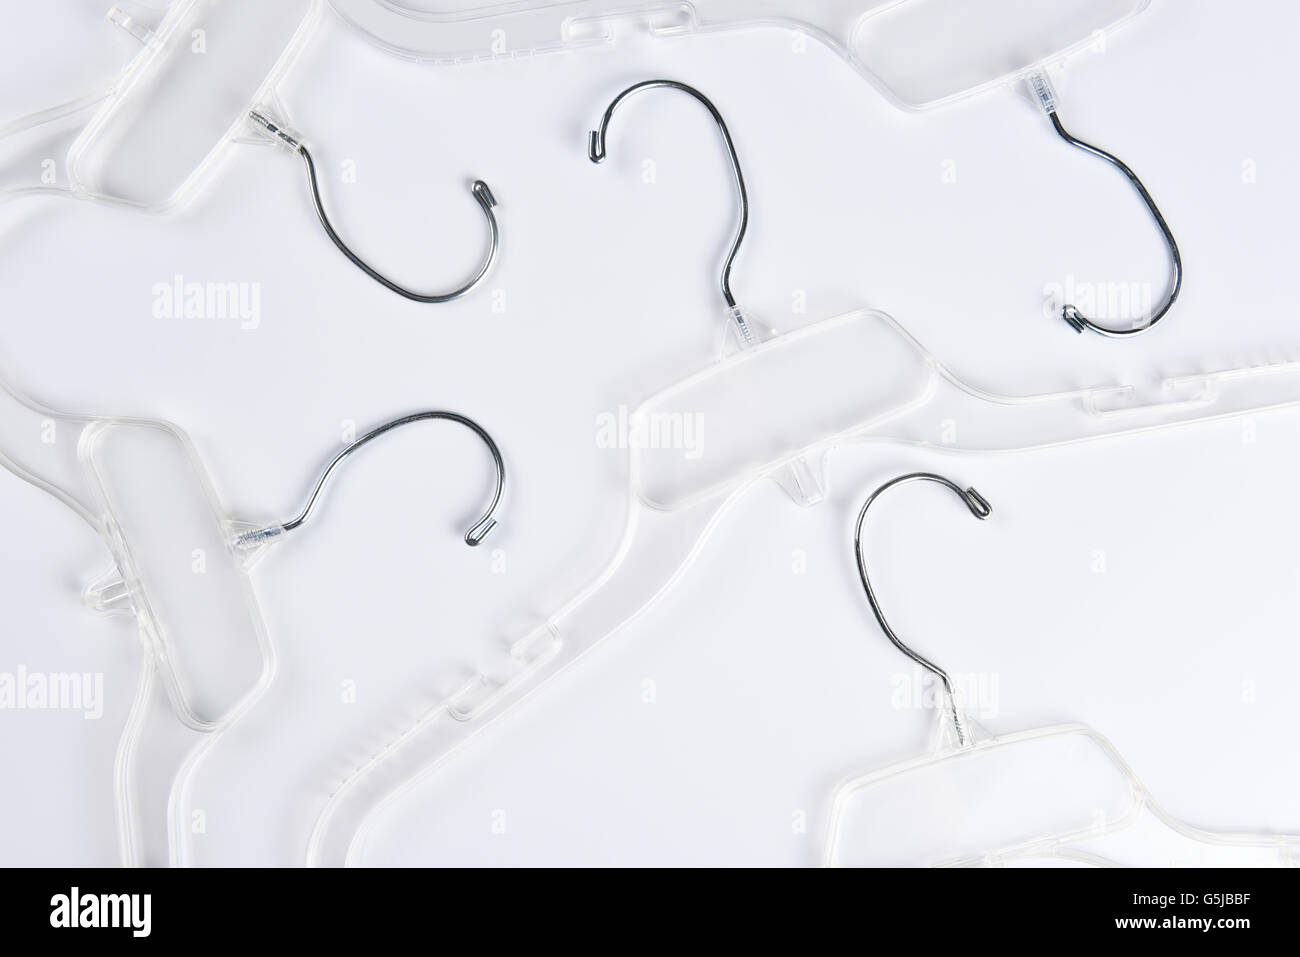 High angle view of a group of clear plastic clothes hangers on a white background. Stock Photo